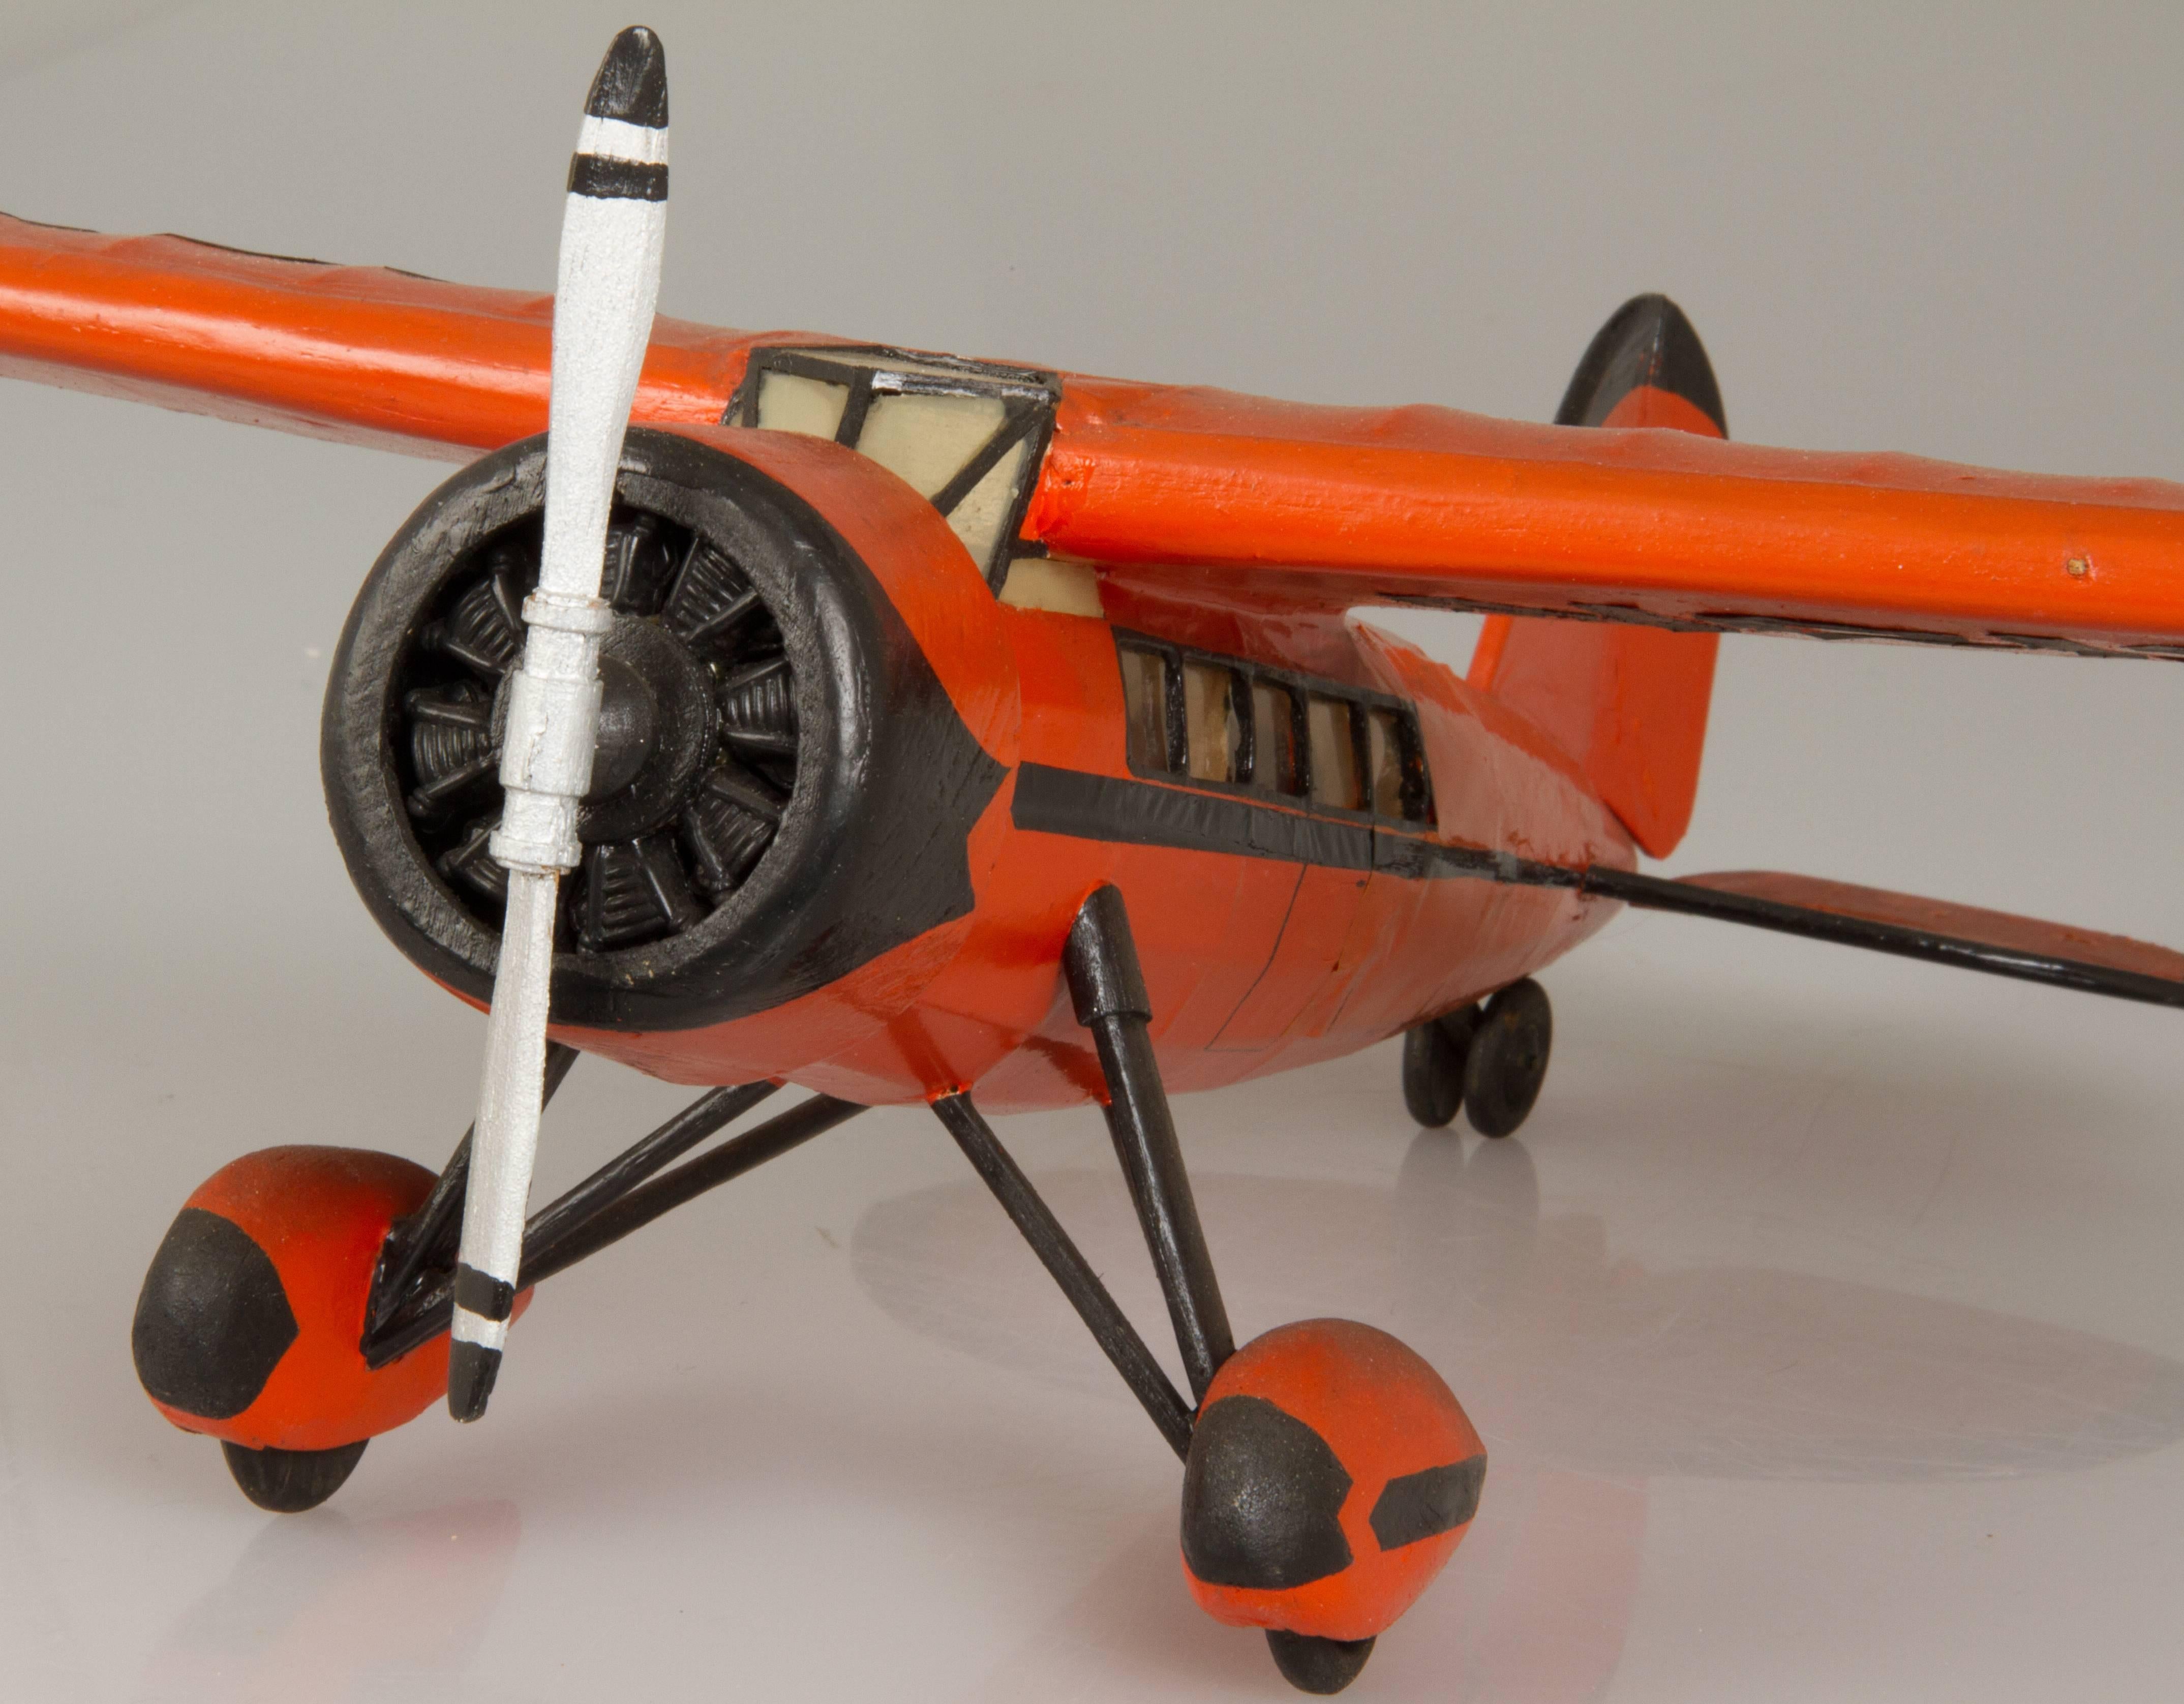 This is a handmade sea plane in a wonderful orange color. The Vega was well-known for being a favorite aircraft of Amelia Earhart. The plane is made of paper over blast wood.